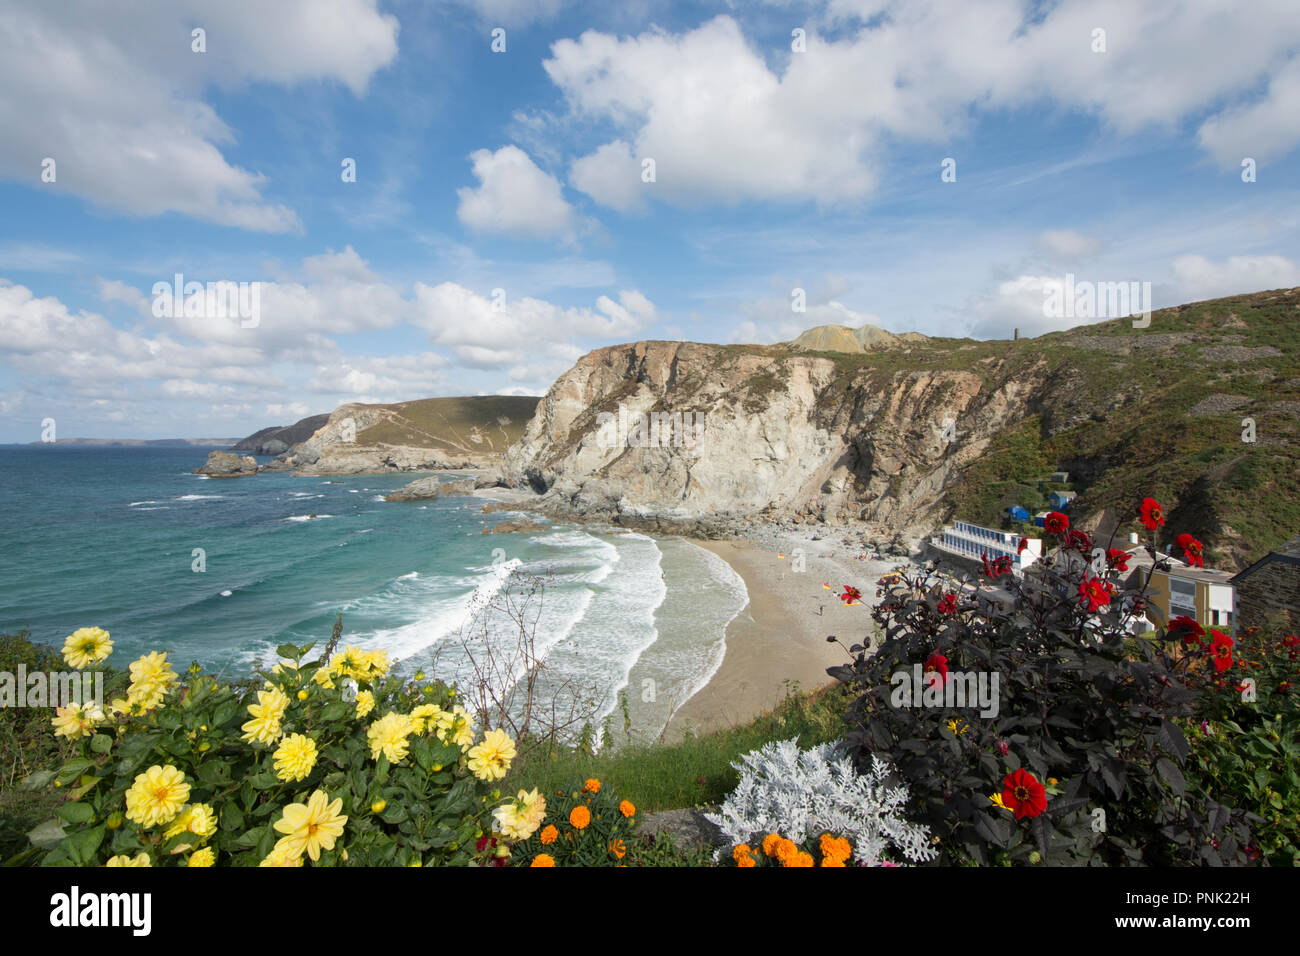 Trevaunance Cove, near St Agnes, Cornwall, UK, September, Surfing beach seen from cliff path, garden flowers in foreground. Stock Photo